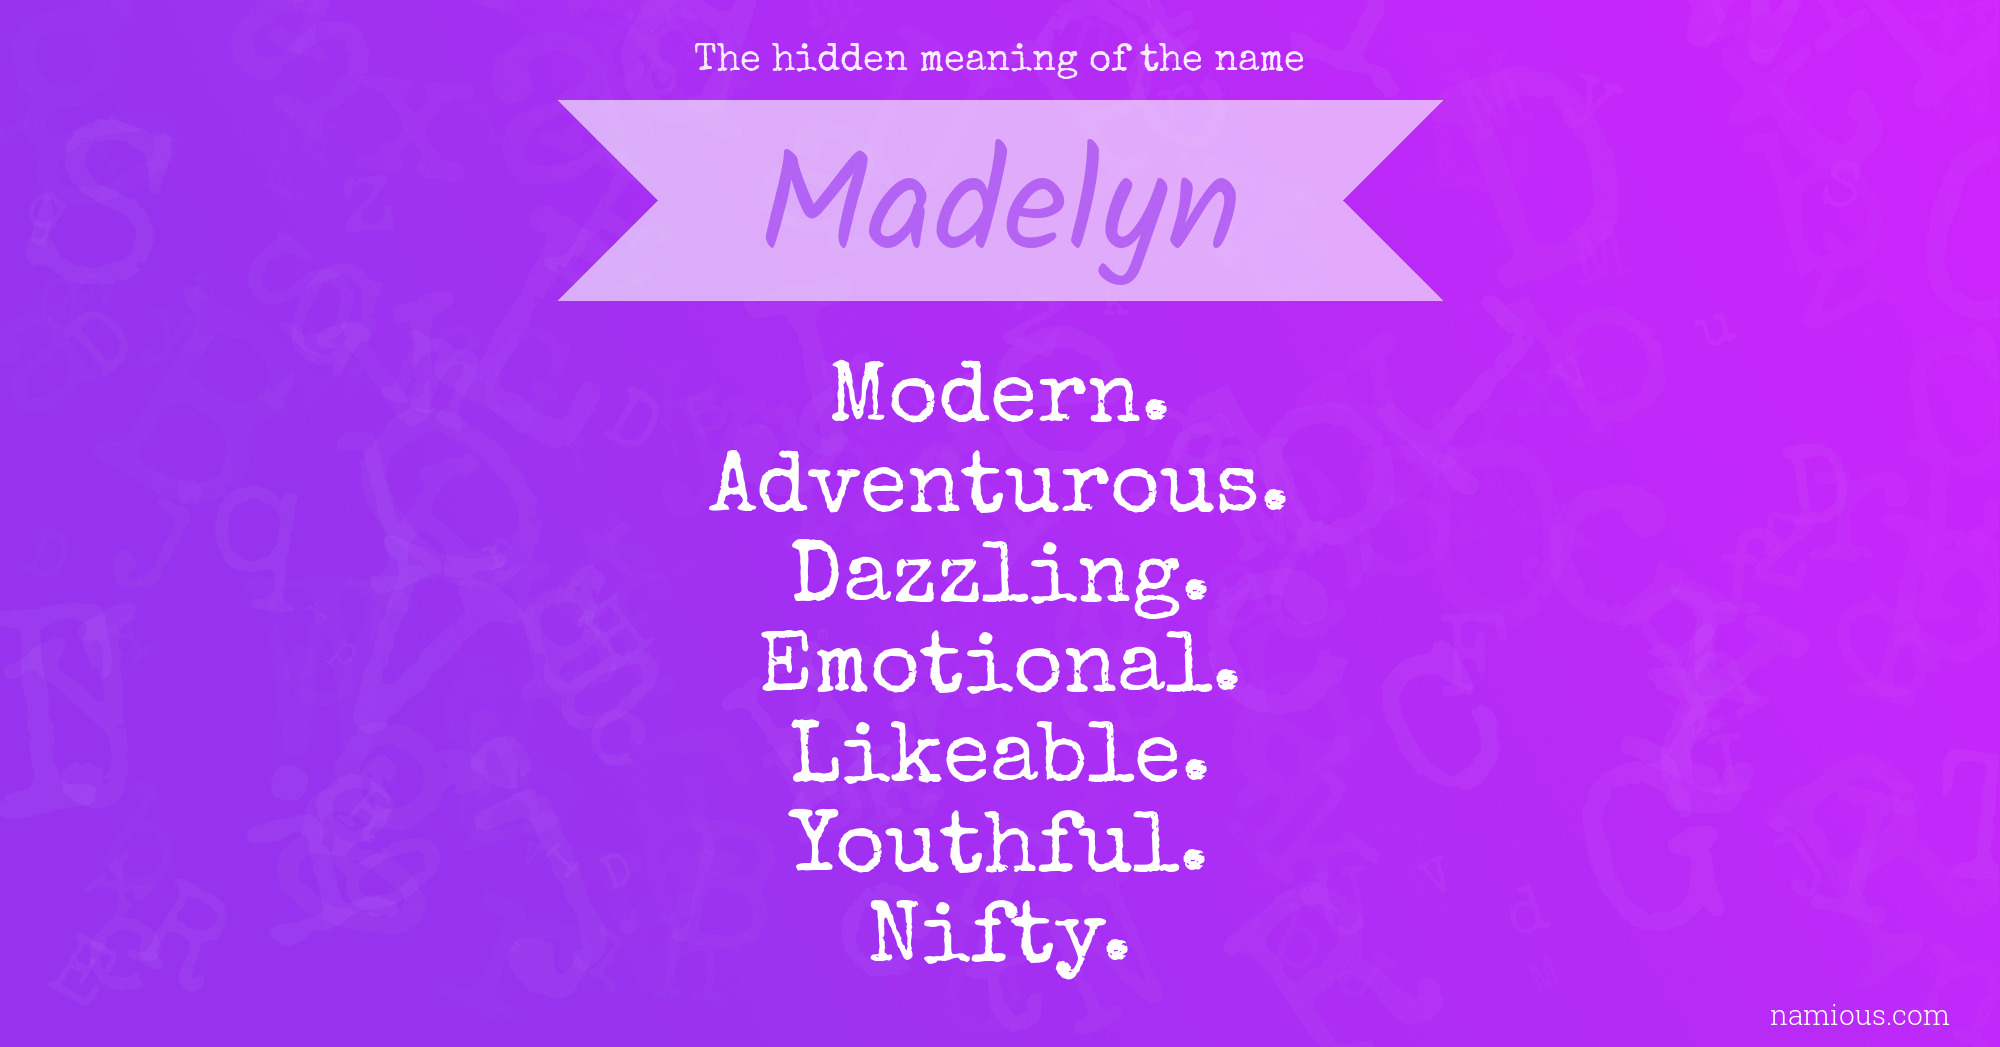 The hidden meaning of the name Madelyn